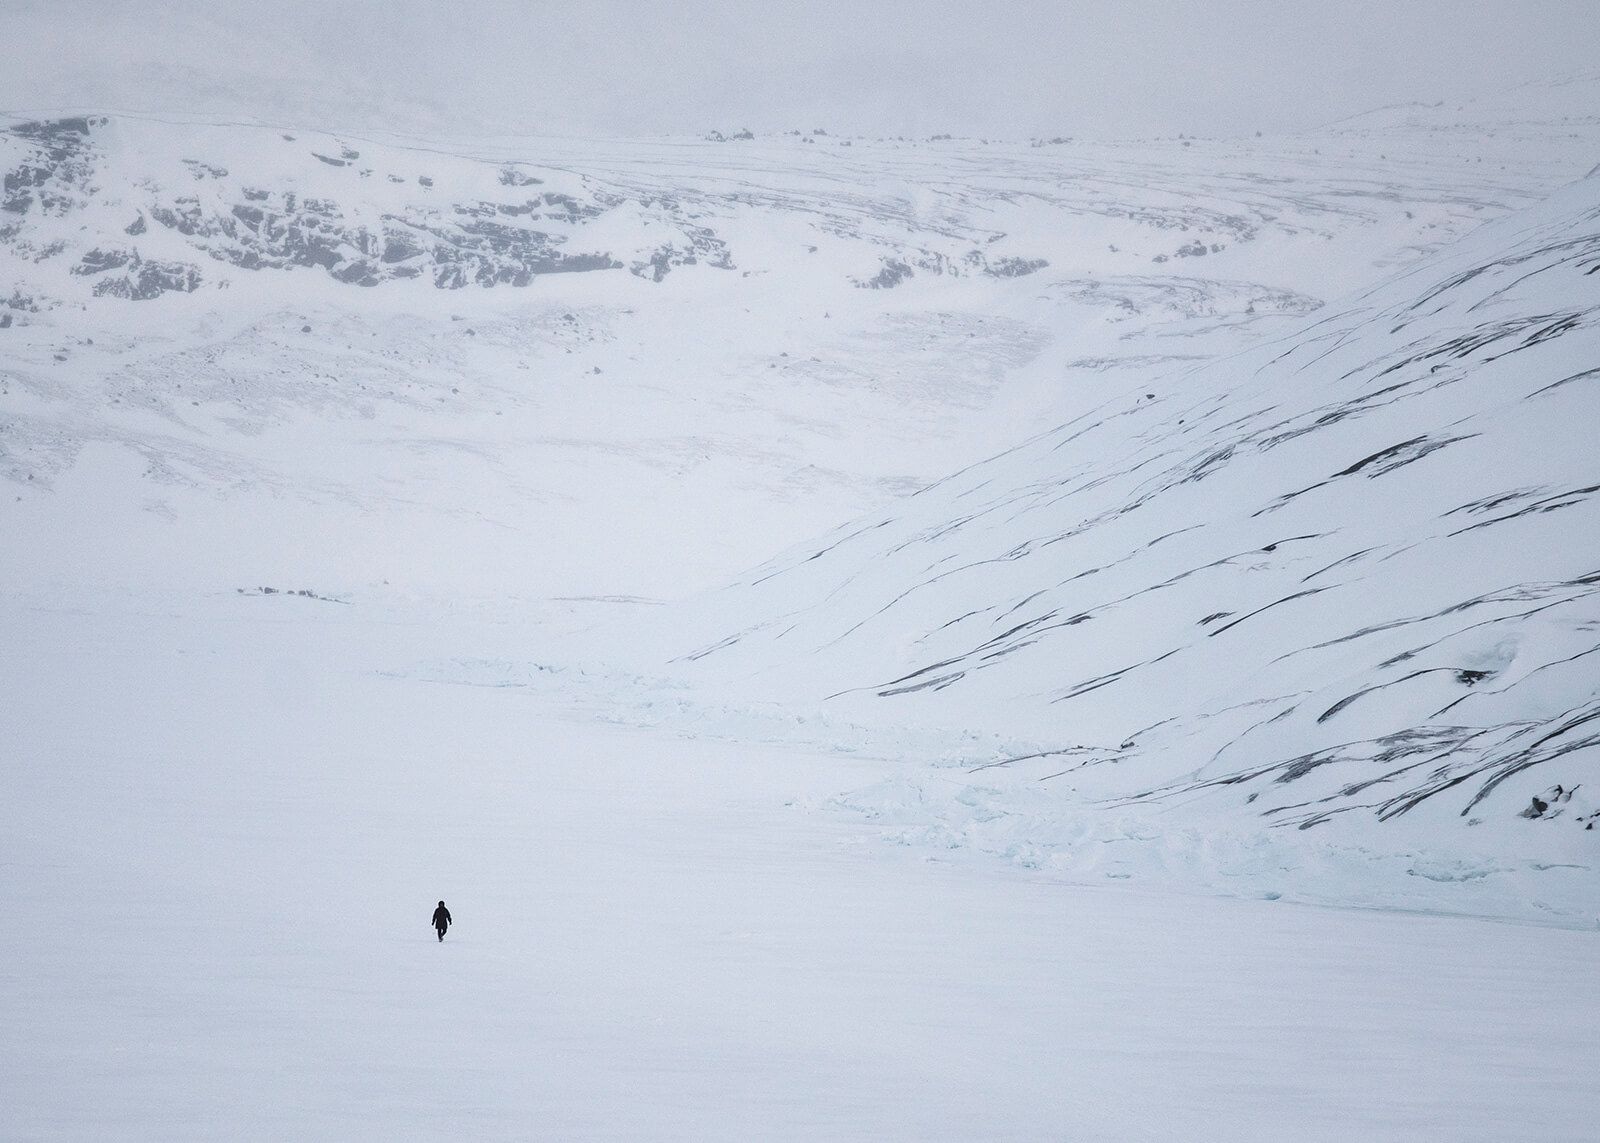 A woman takes her daily walk across the frozen bay next to Oqaatsut. Image by Jonas Bendiksen/Magnum Photos. Greenland, 2018.